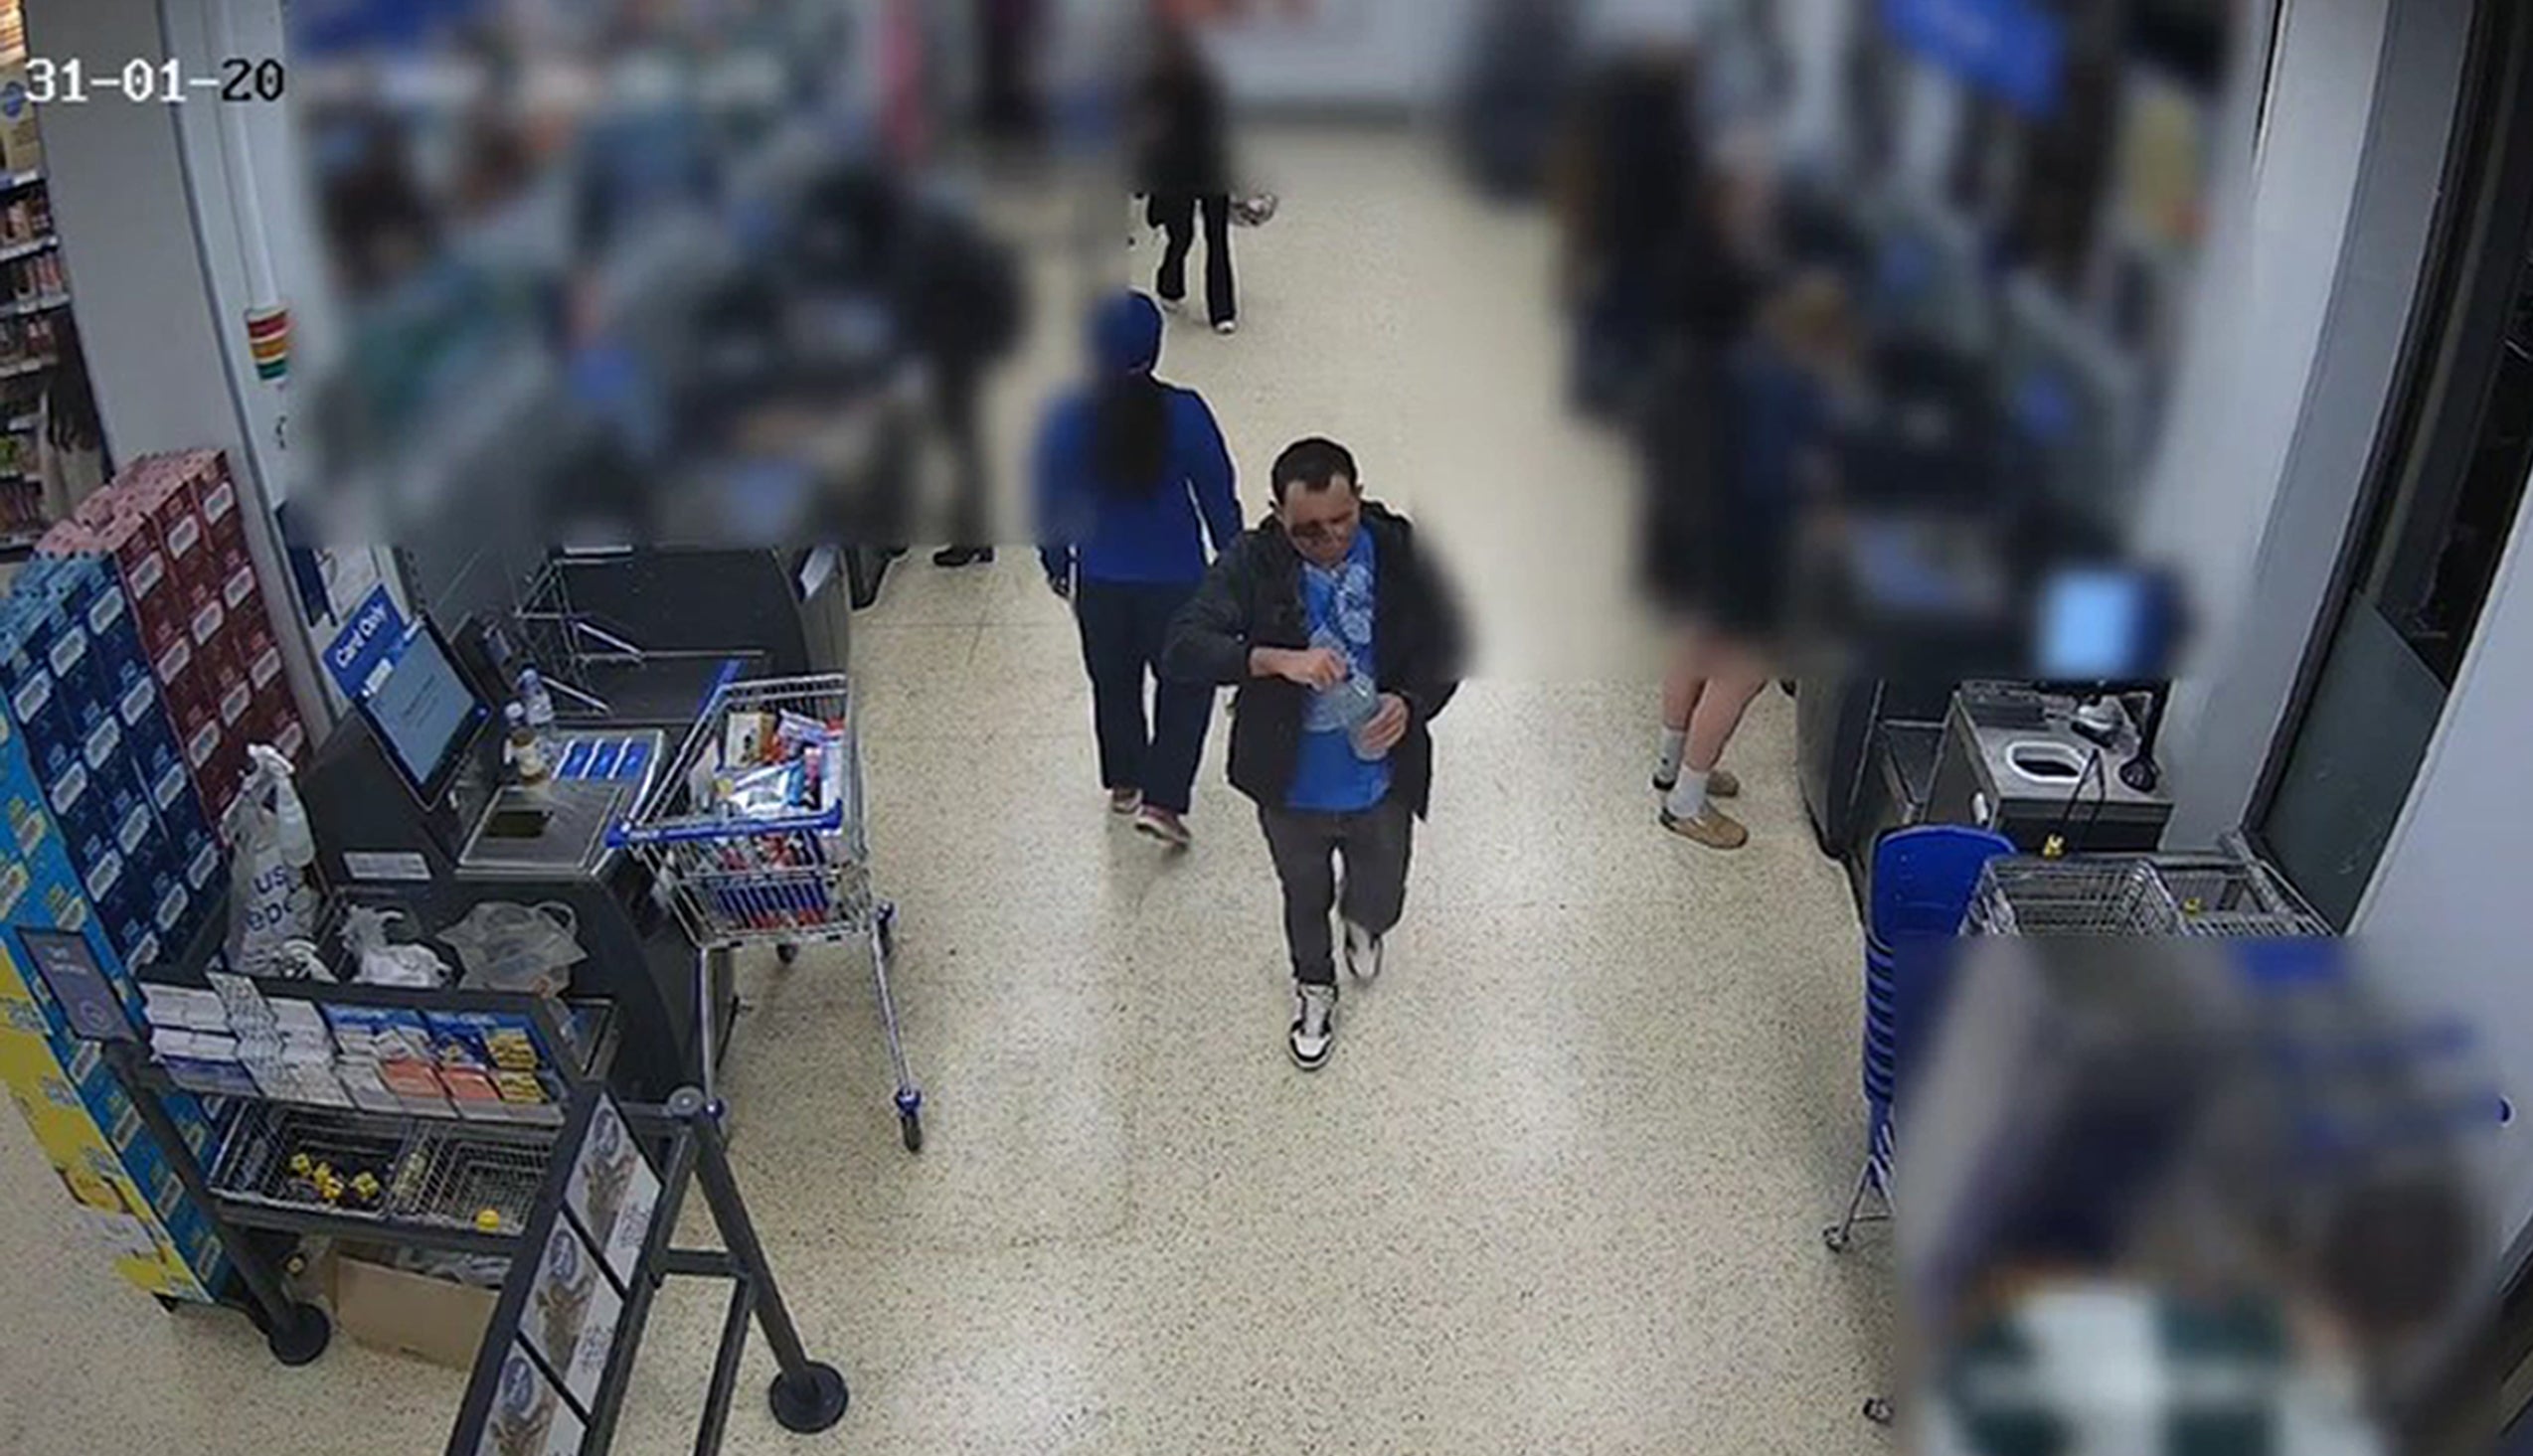 CCTV footage shows Ezedi at Tesco near King’s Cross shortly after the attack